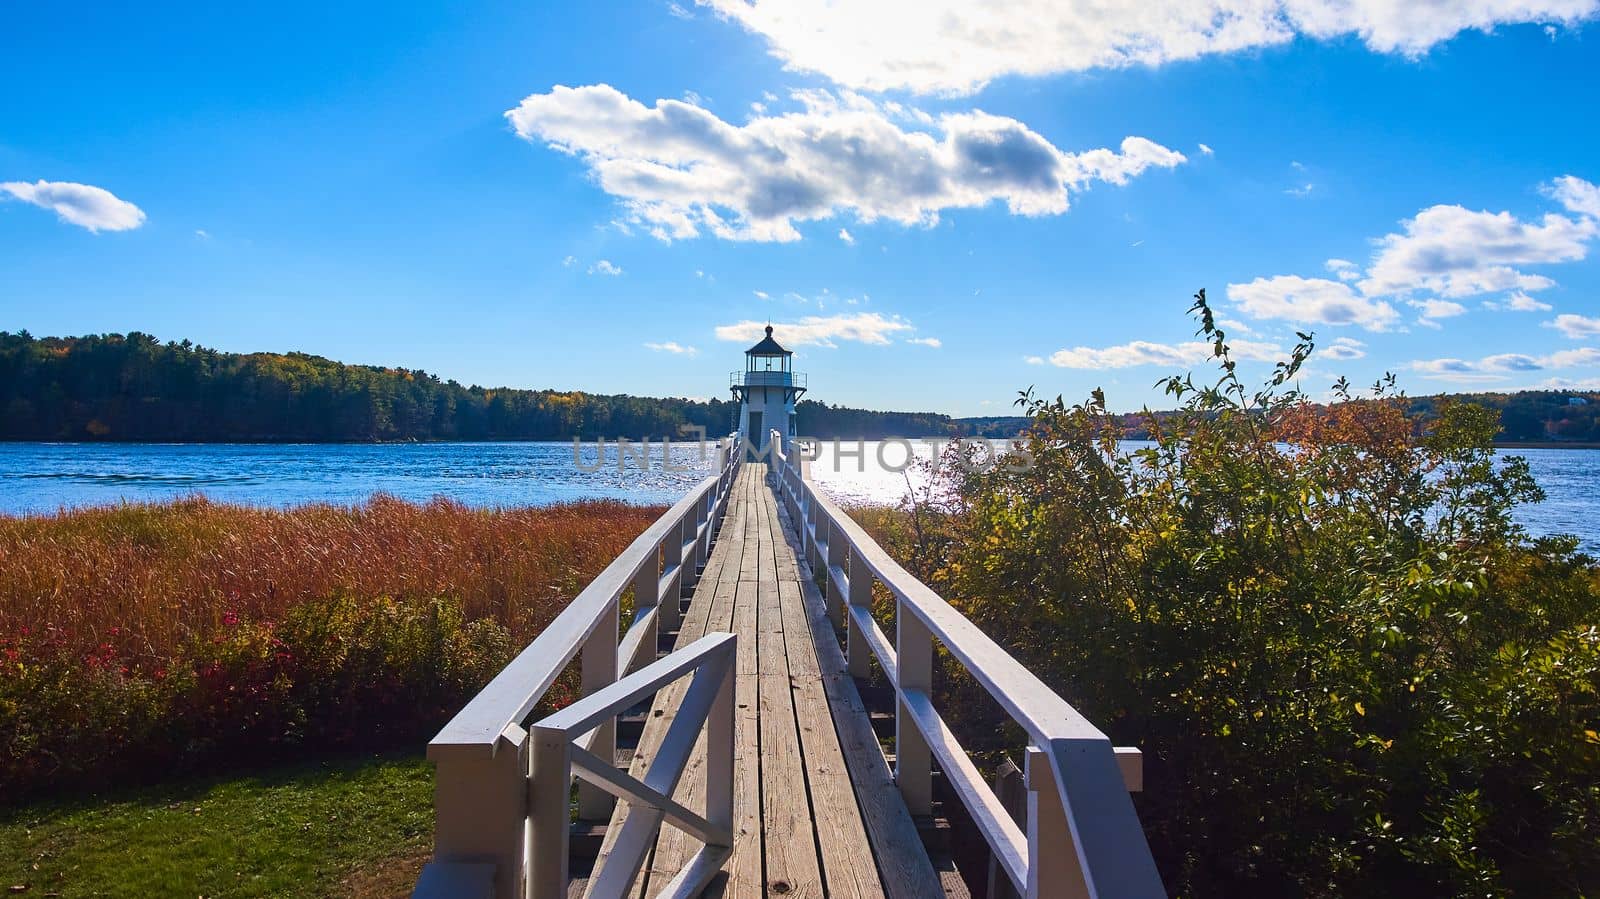 Small boardwalk pedestrian walkway bridge with gate leading towards tiny Maine lighthouse by njproductions